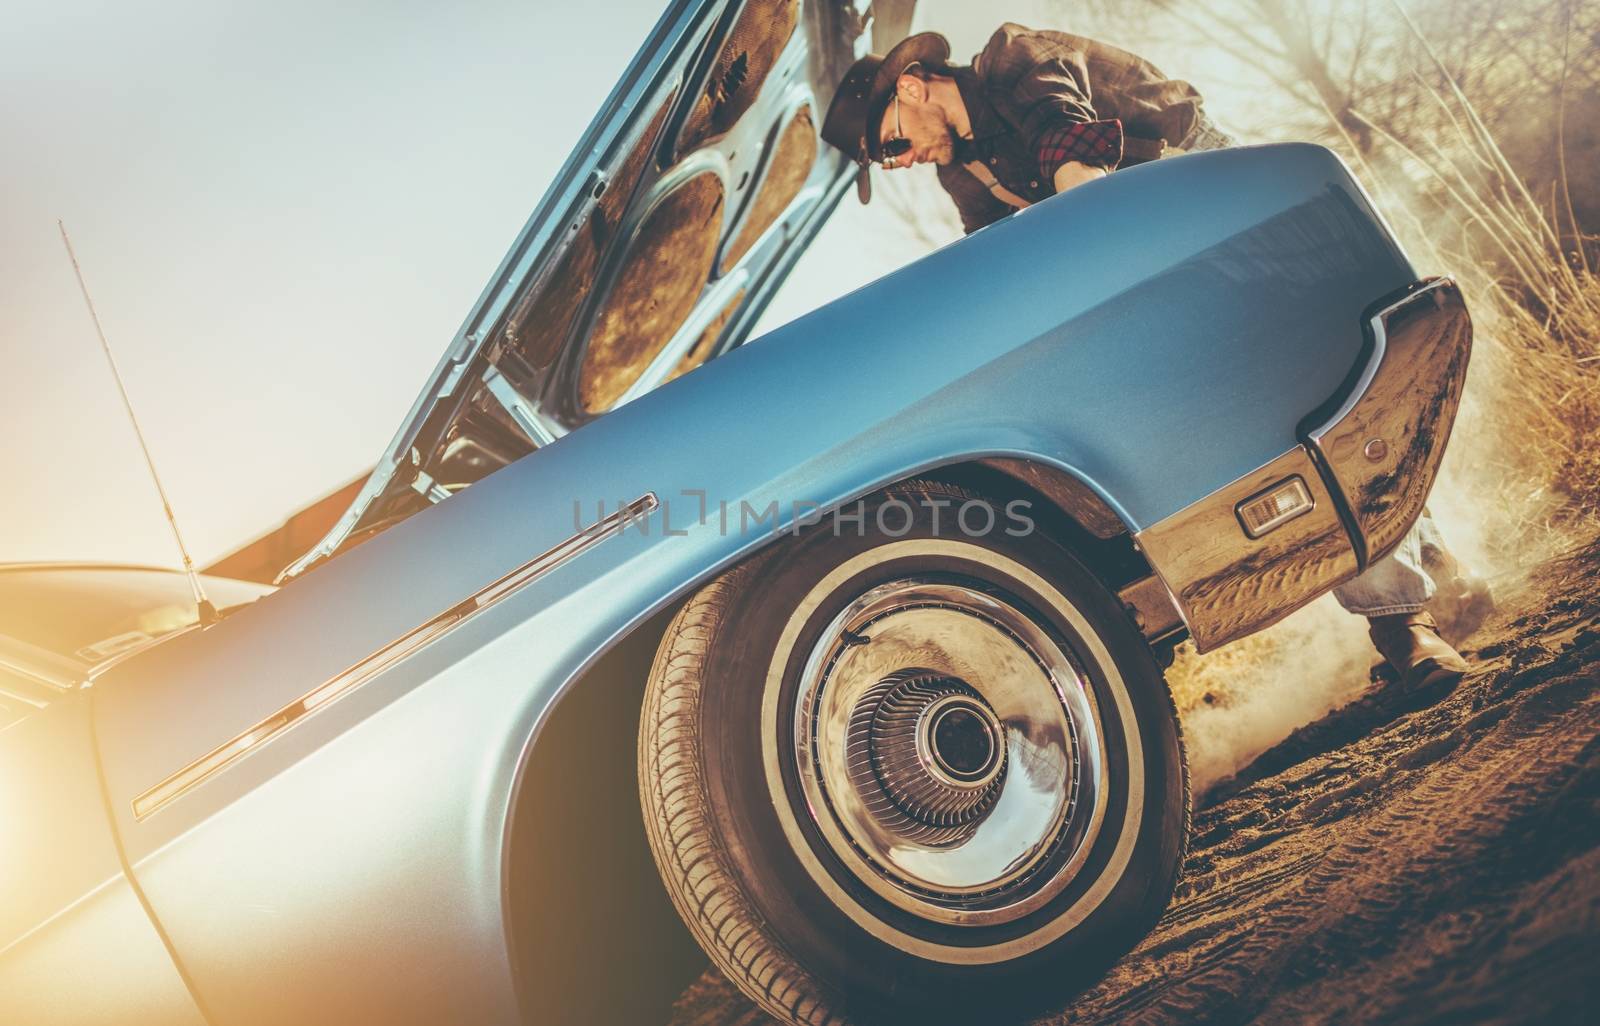 Cowboy and the Broken Car by welcomia